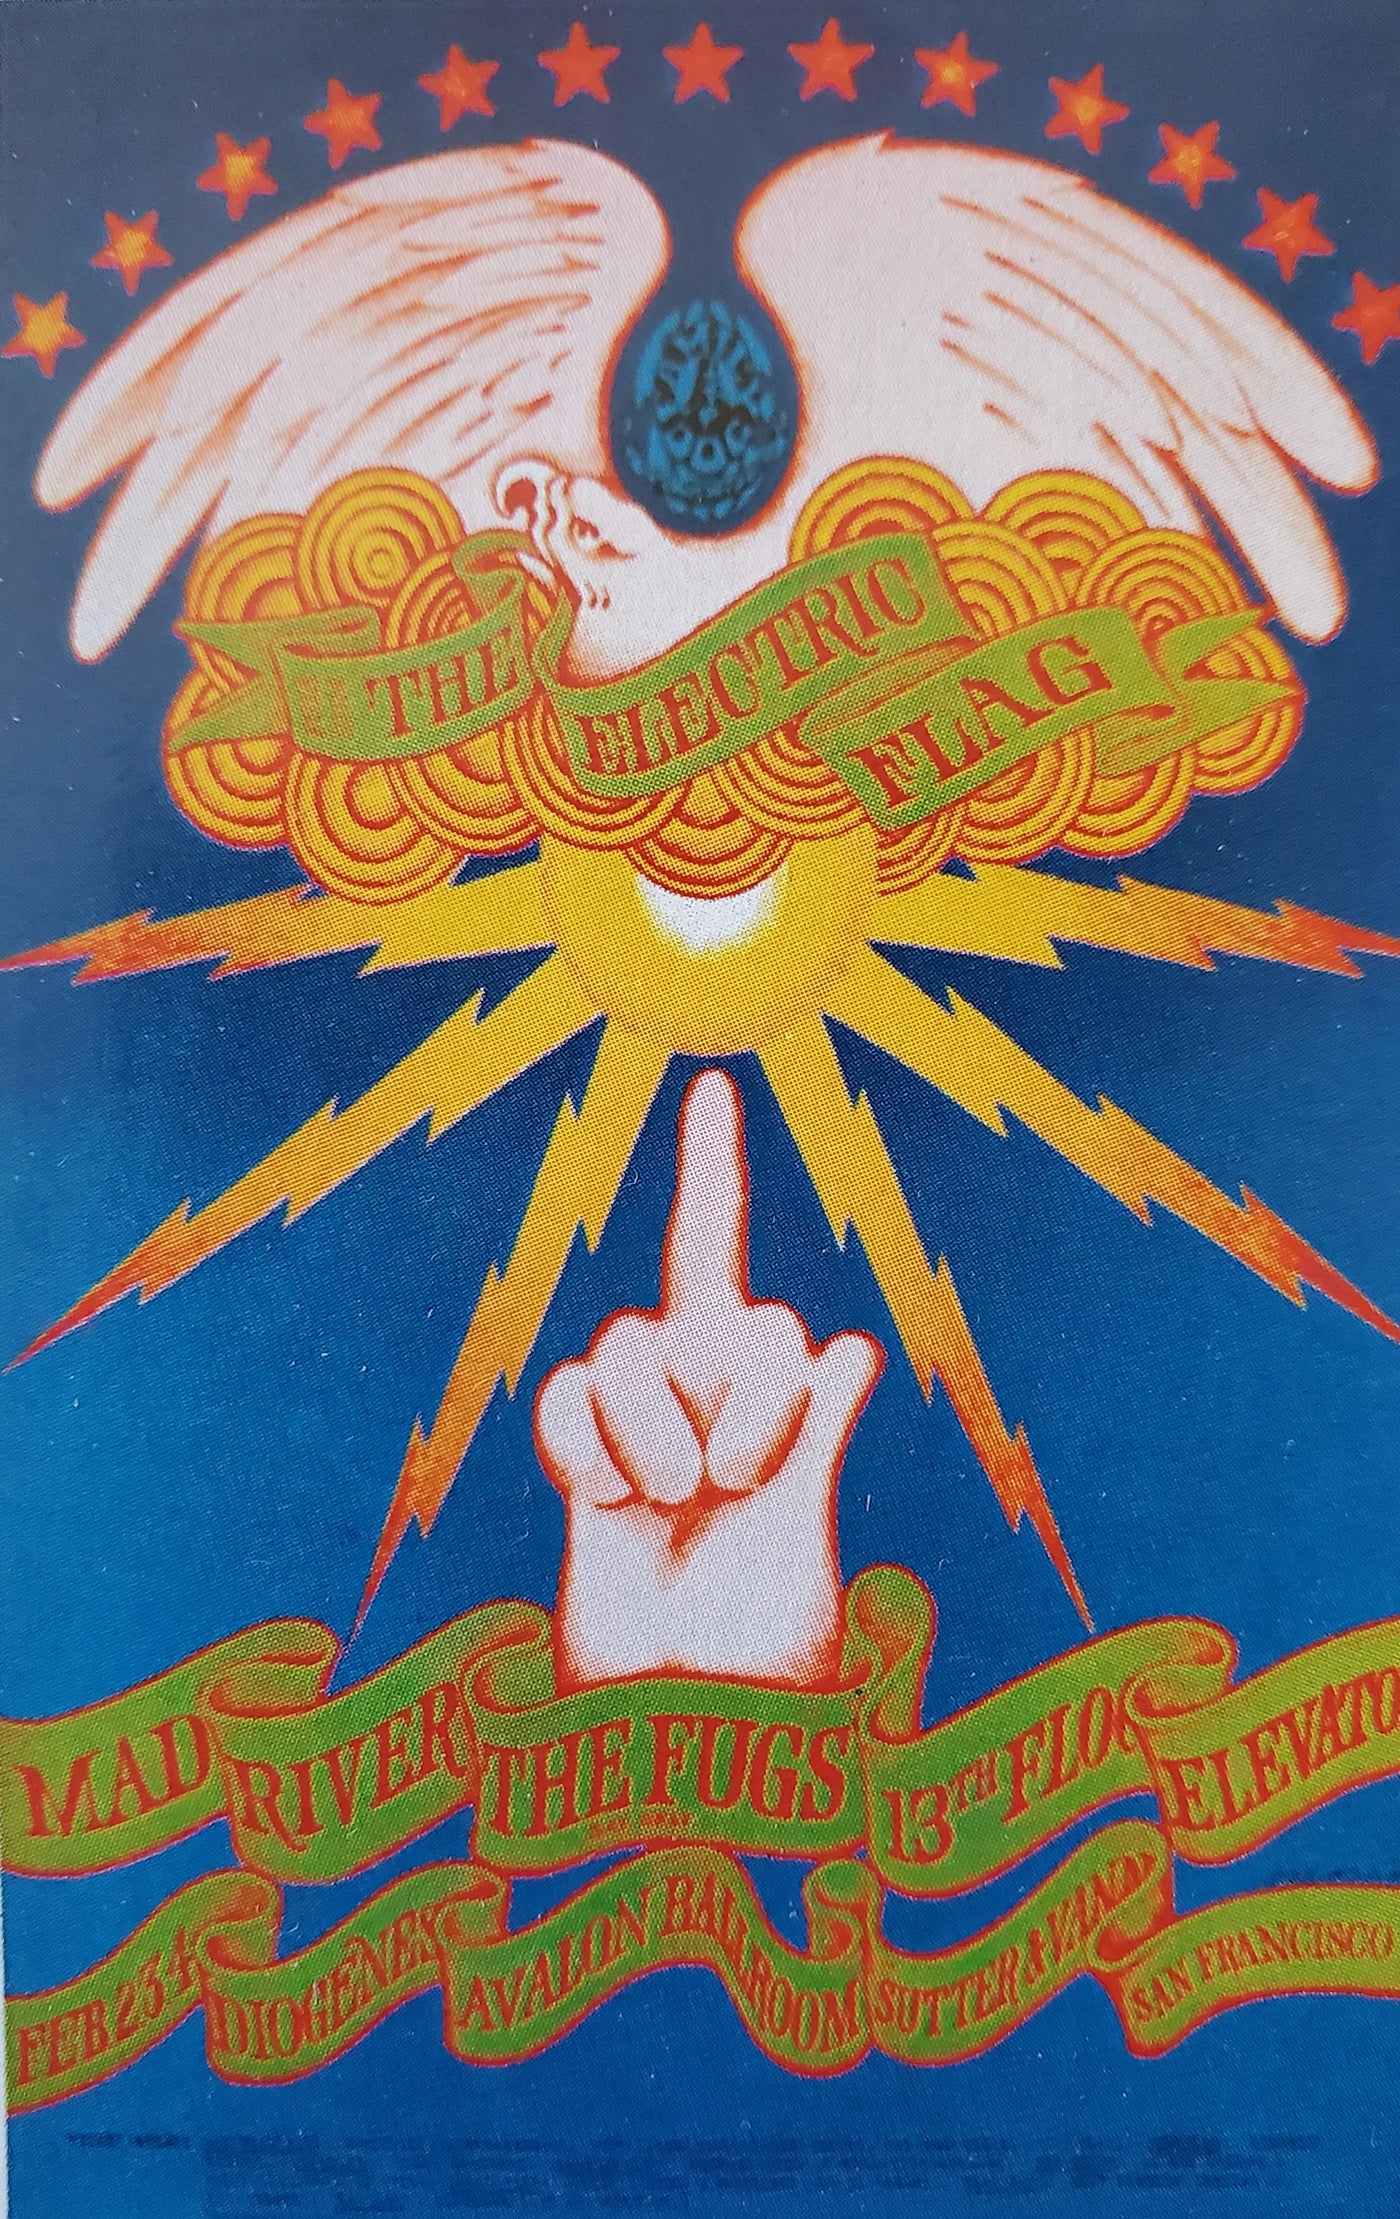 Afterthought Poster 276 The Electric Flag/Mad River/The Fugs